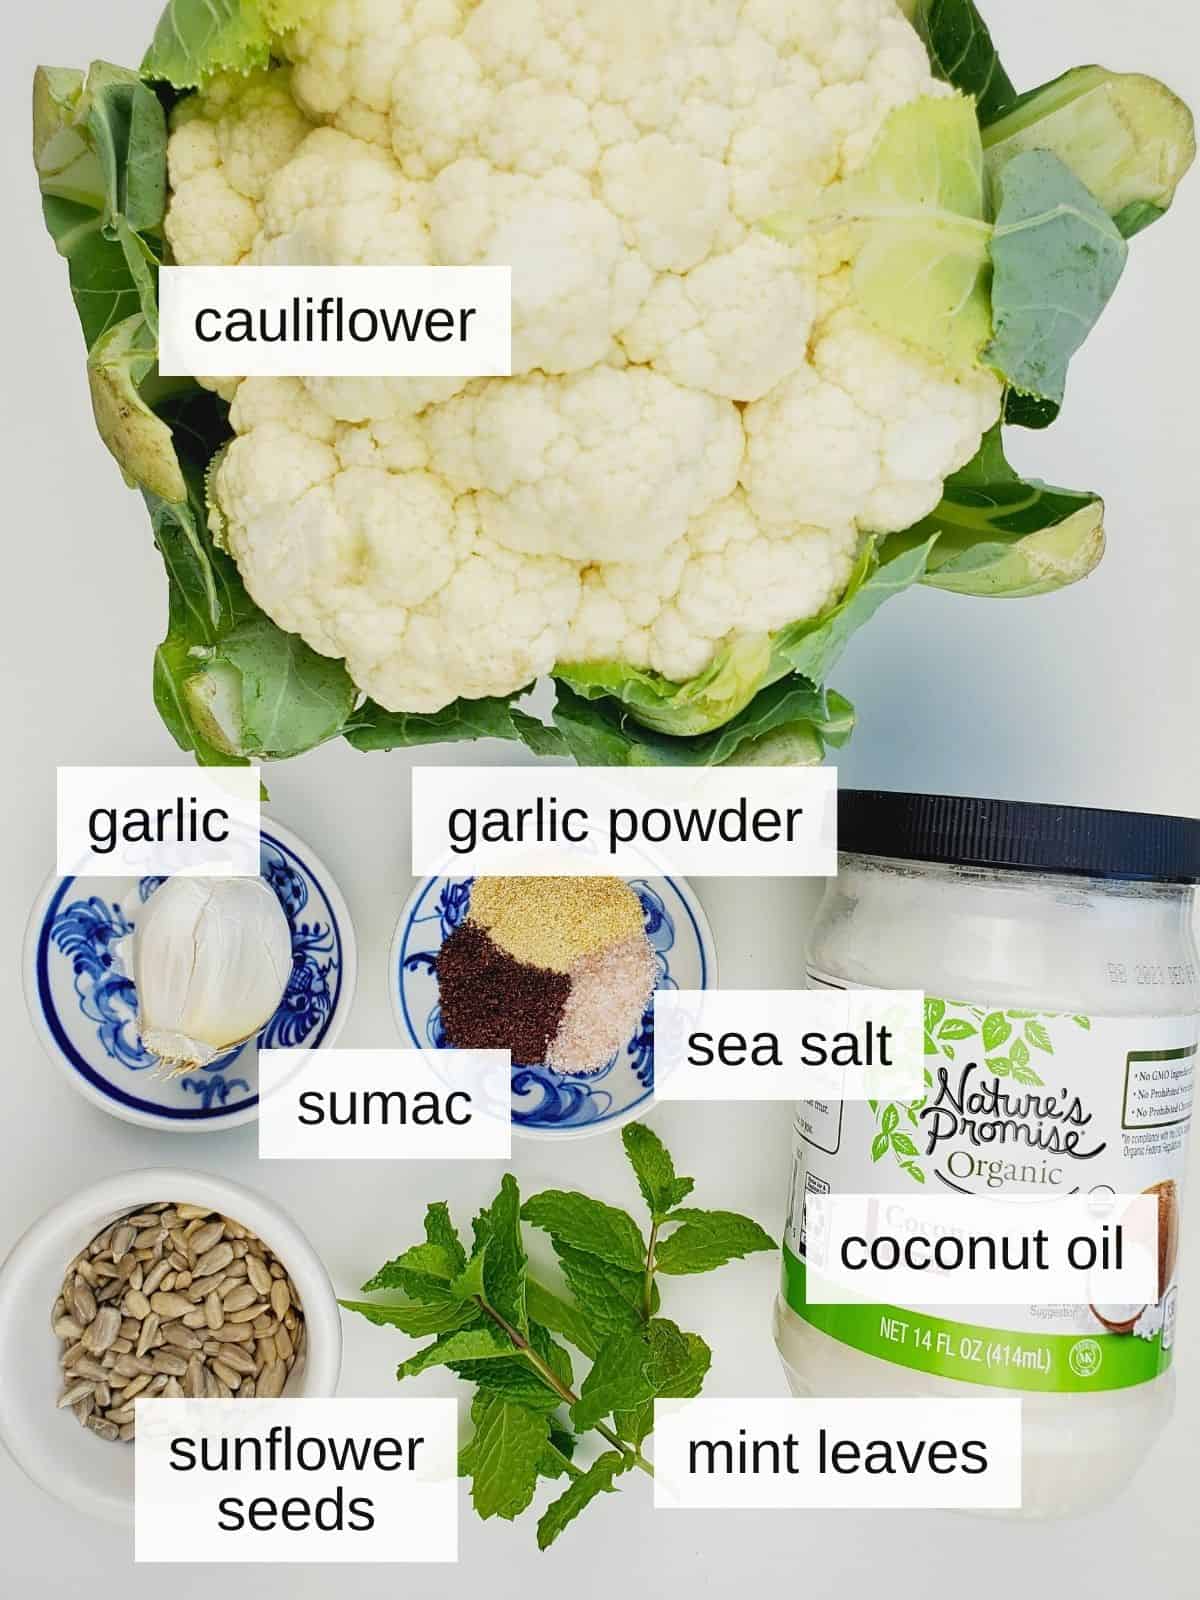 ingredients for air fryer whole cauliflower, including whole cauliflower, garlic cloves, garlic powder, sumac, sea salt, coconut oil, sunflower seeds, and mint leaves.